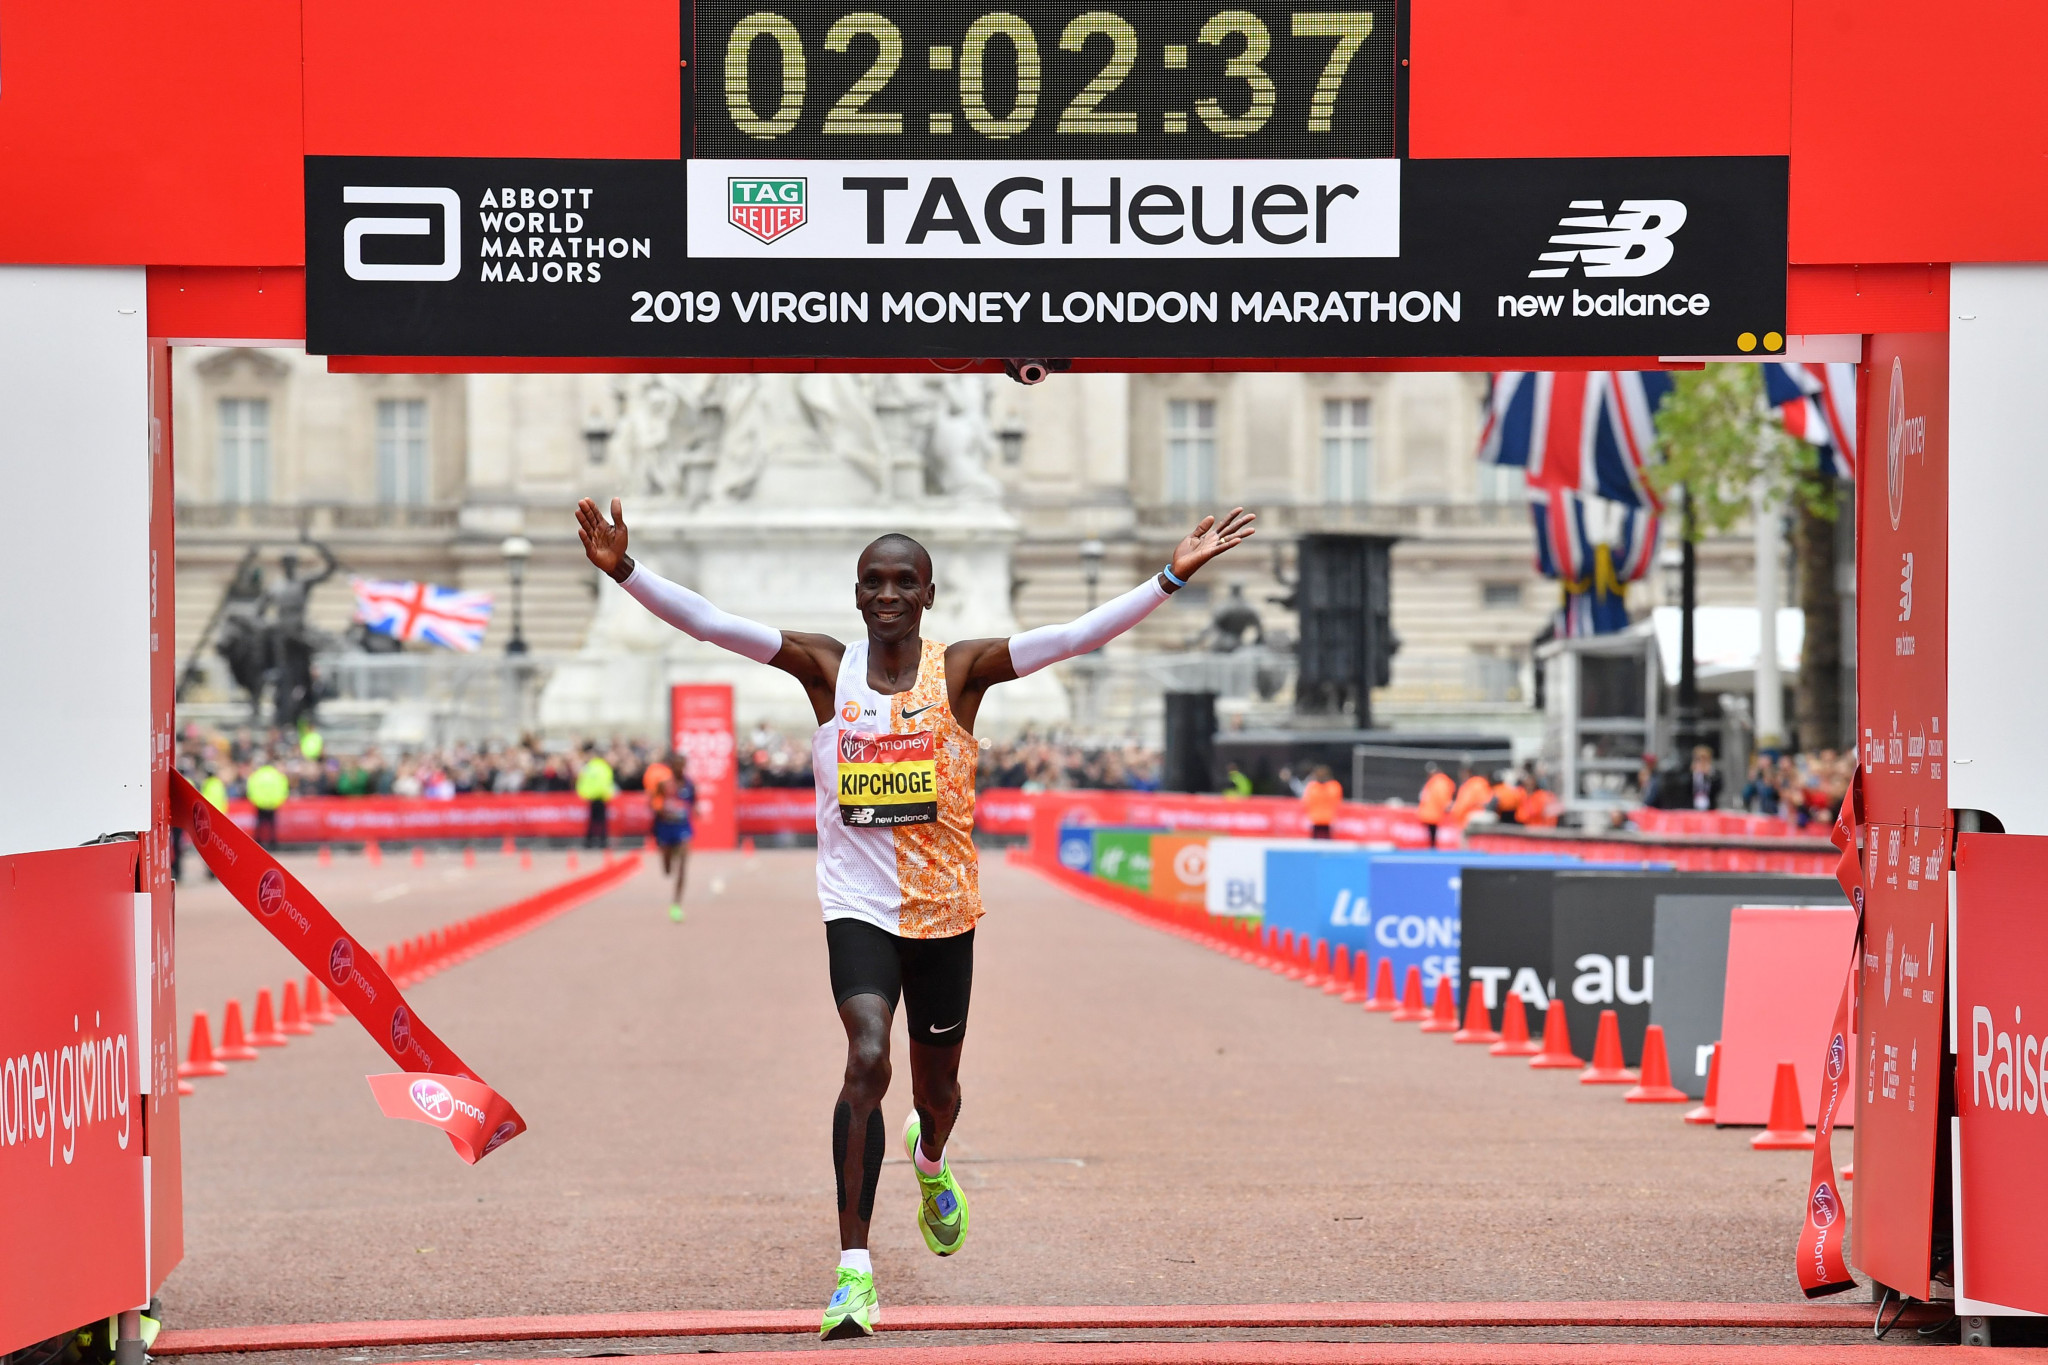 Eliud Kipchoge produced the second fastest time in history, behind the world record he set last year ©Getty Images